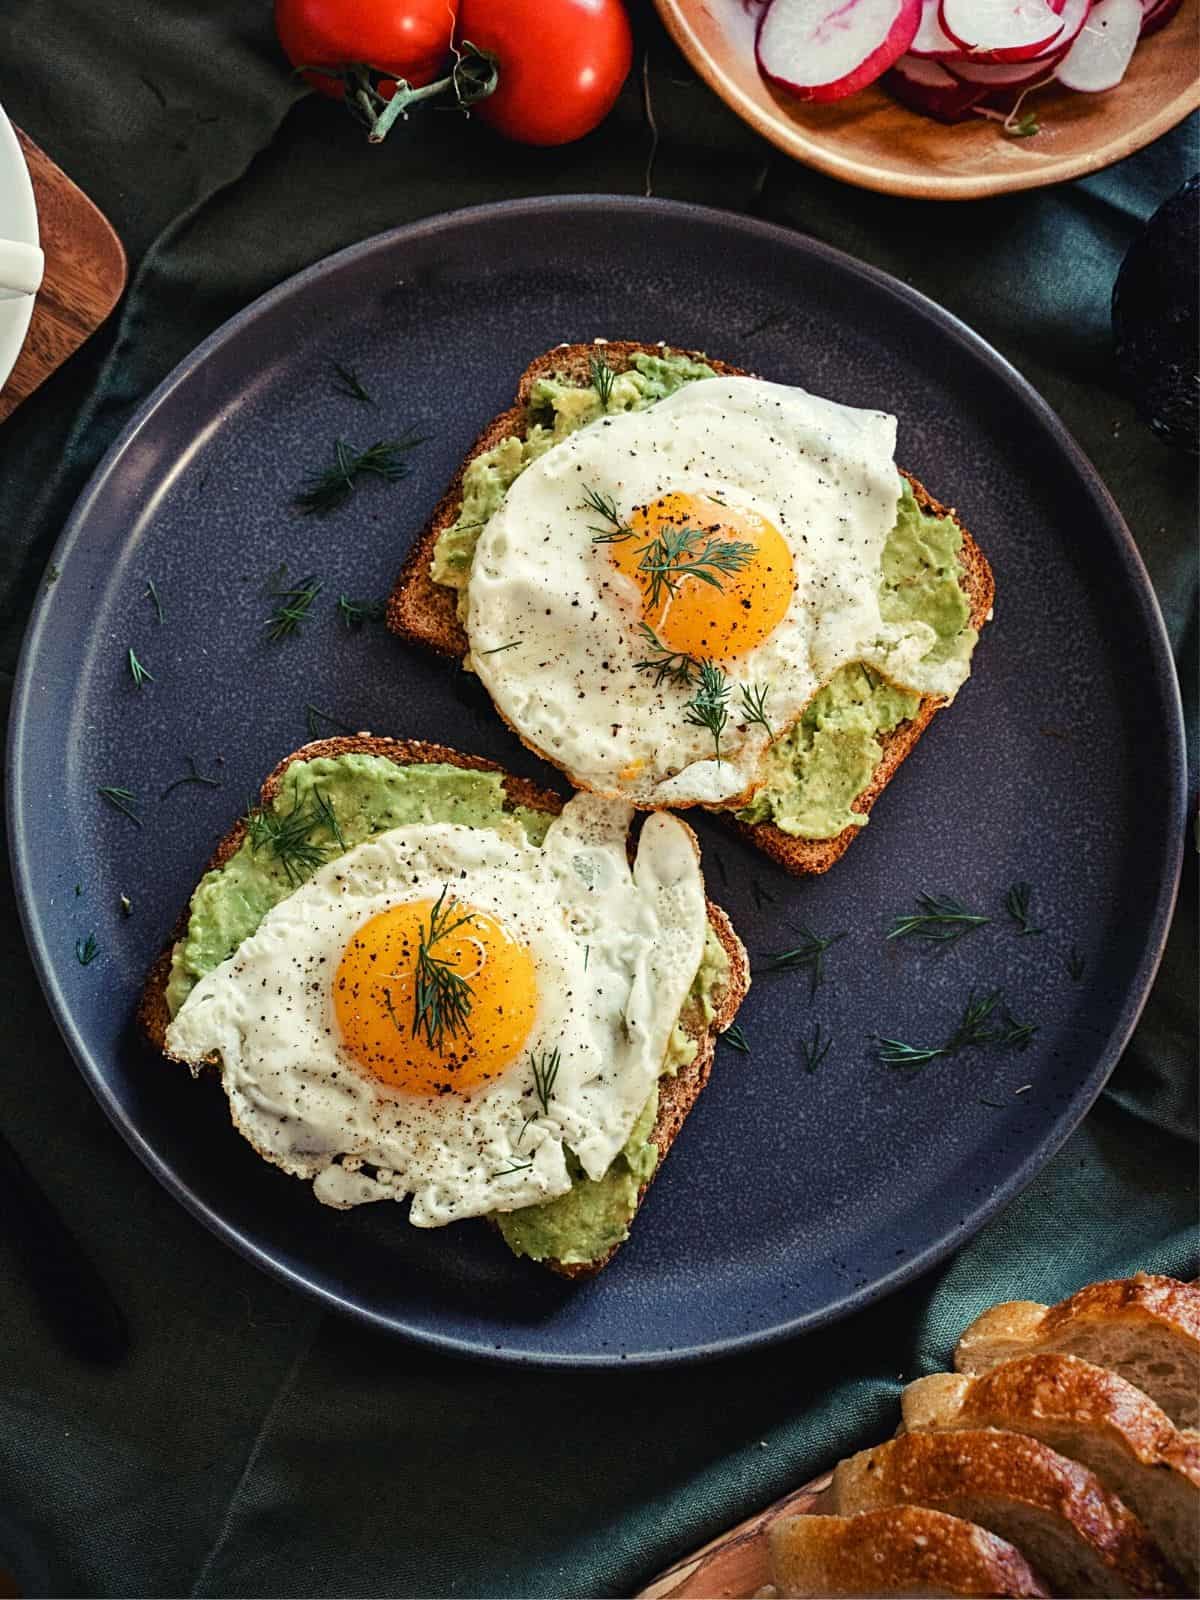 low calorie breakfast ideas for weight loss such as egg avocado toast here on a plate